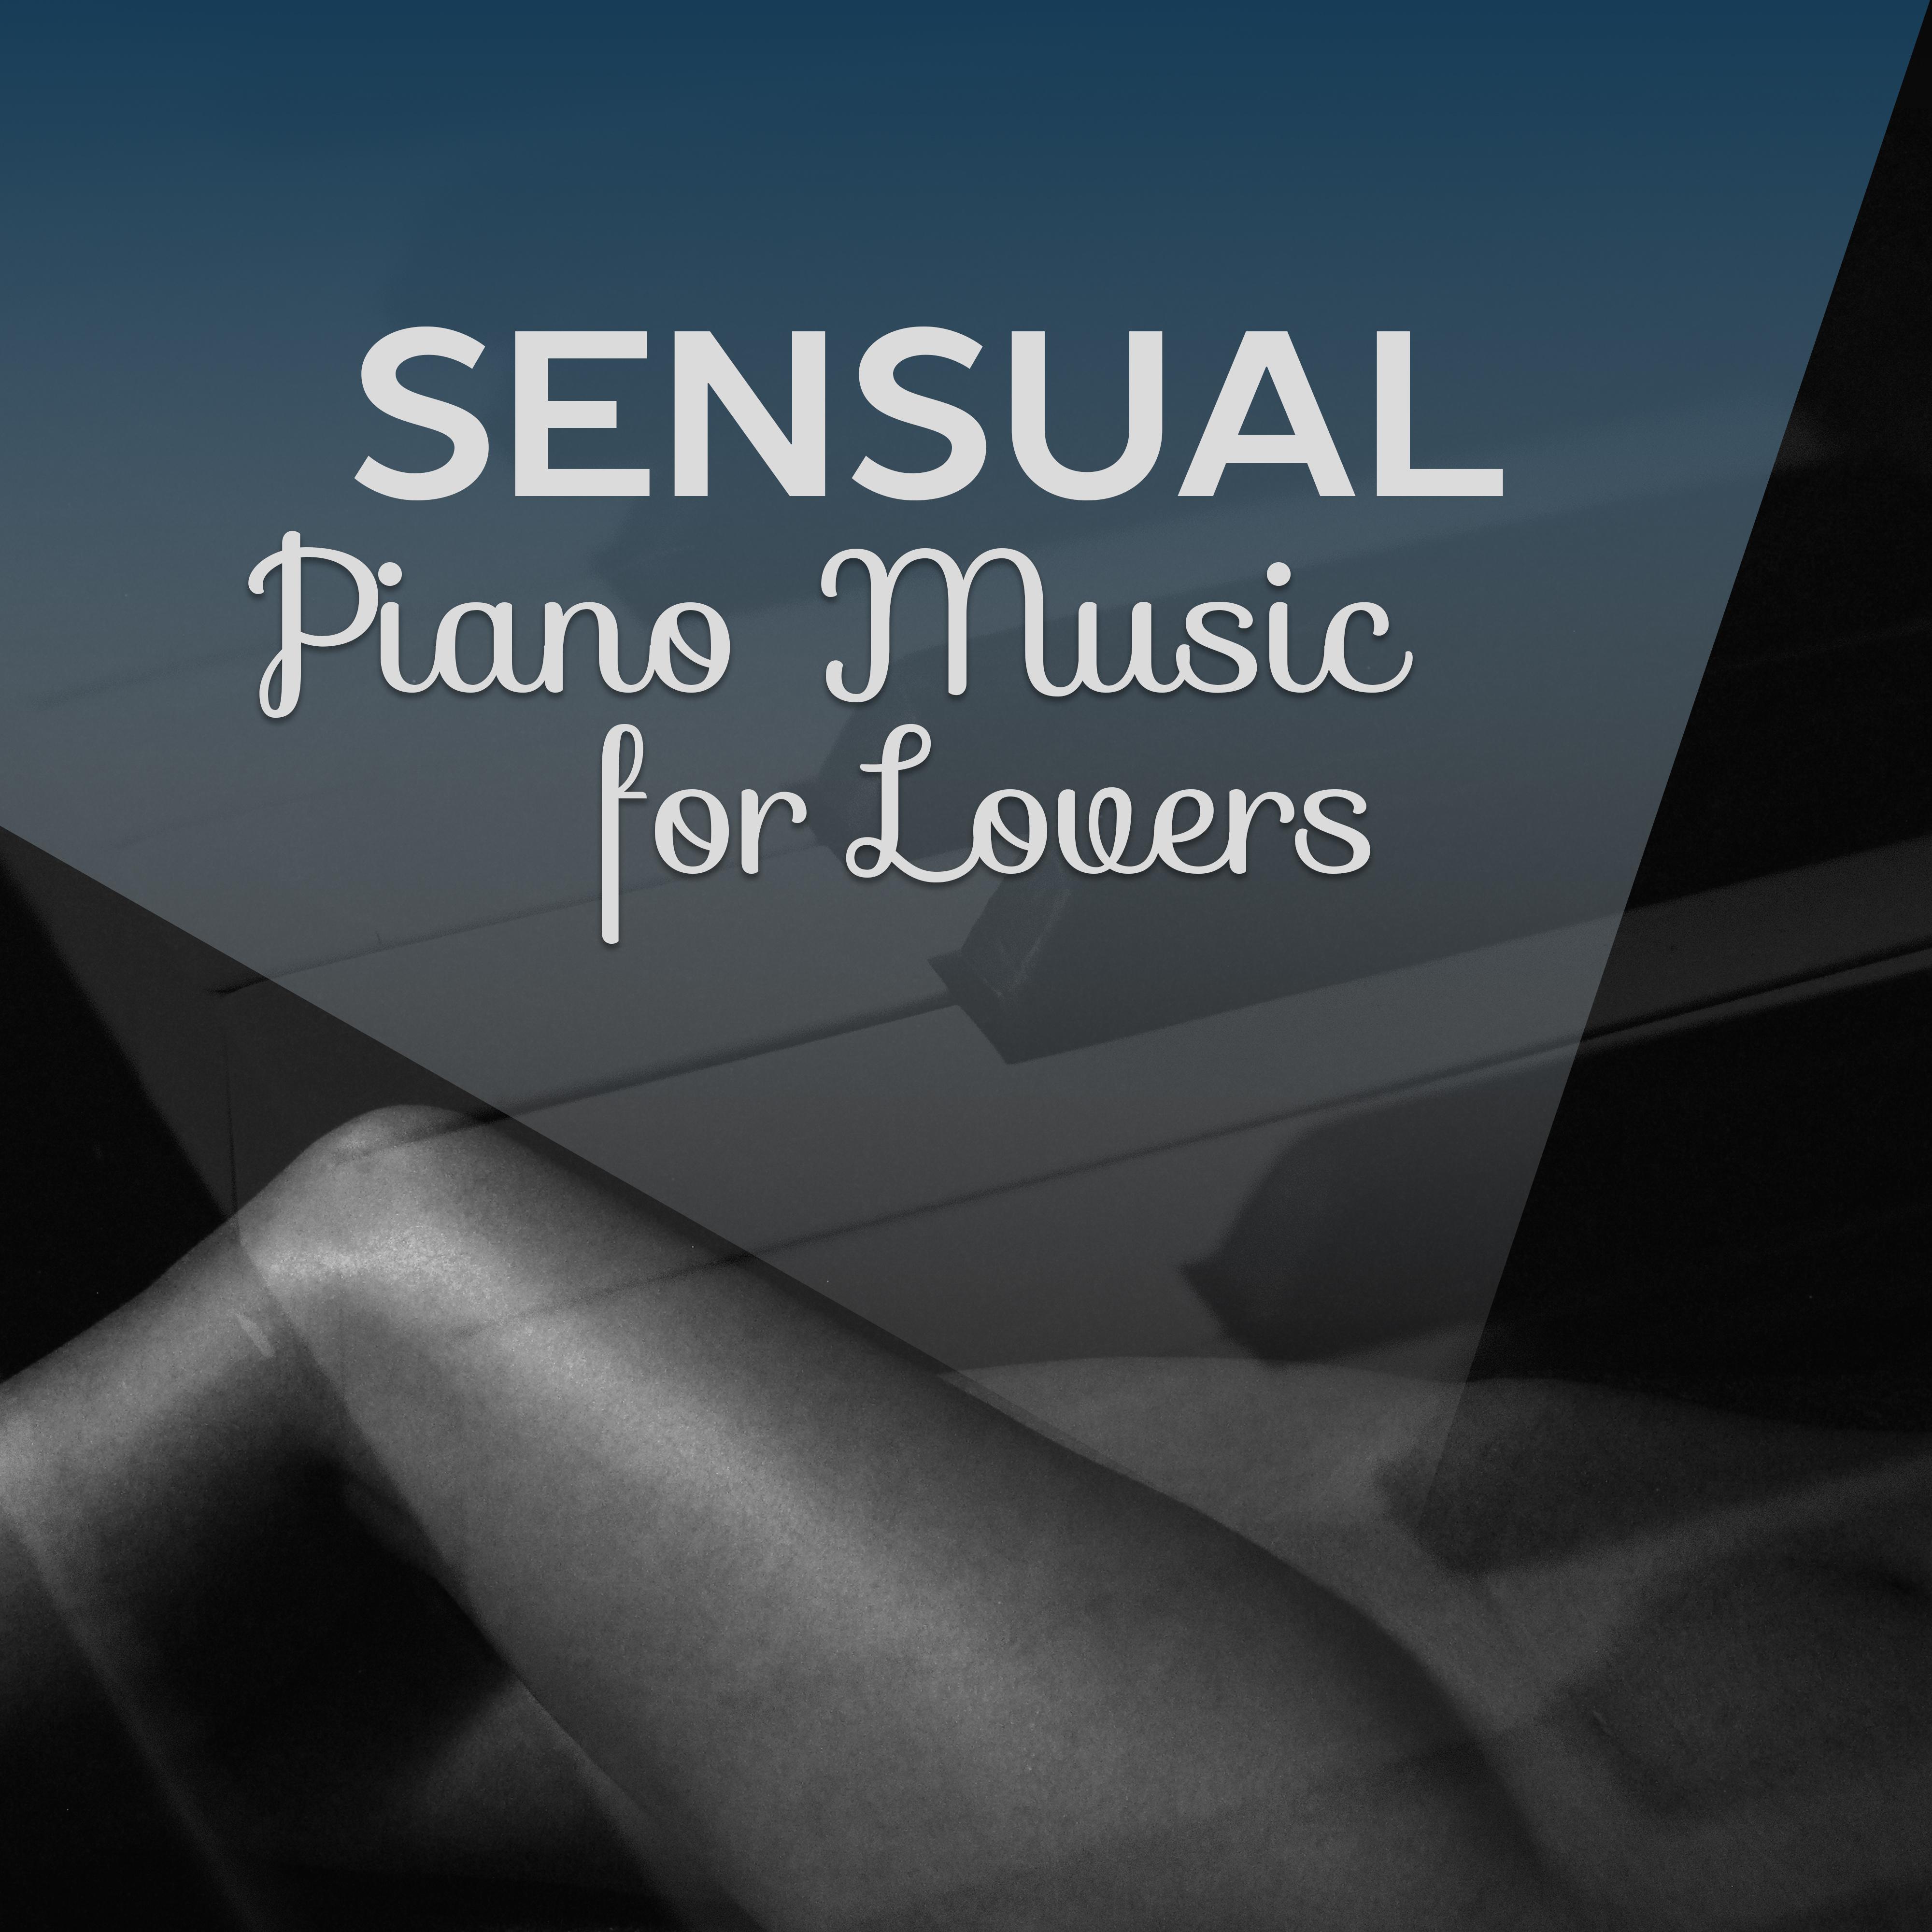 Sensual Piano Music for Lovers  Romantic Restaurant, Piano Bar, Shades of Jazz, Rest  Relax, Candle Light Dinner